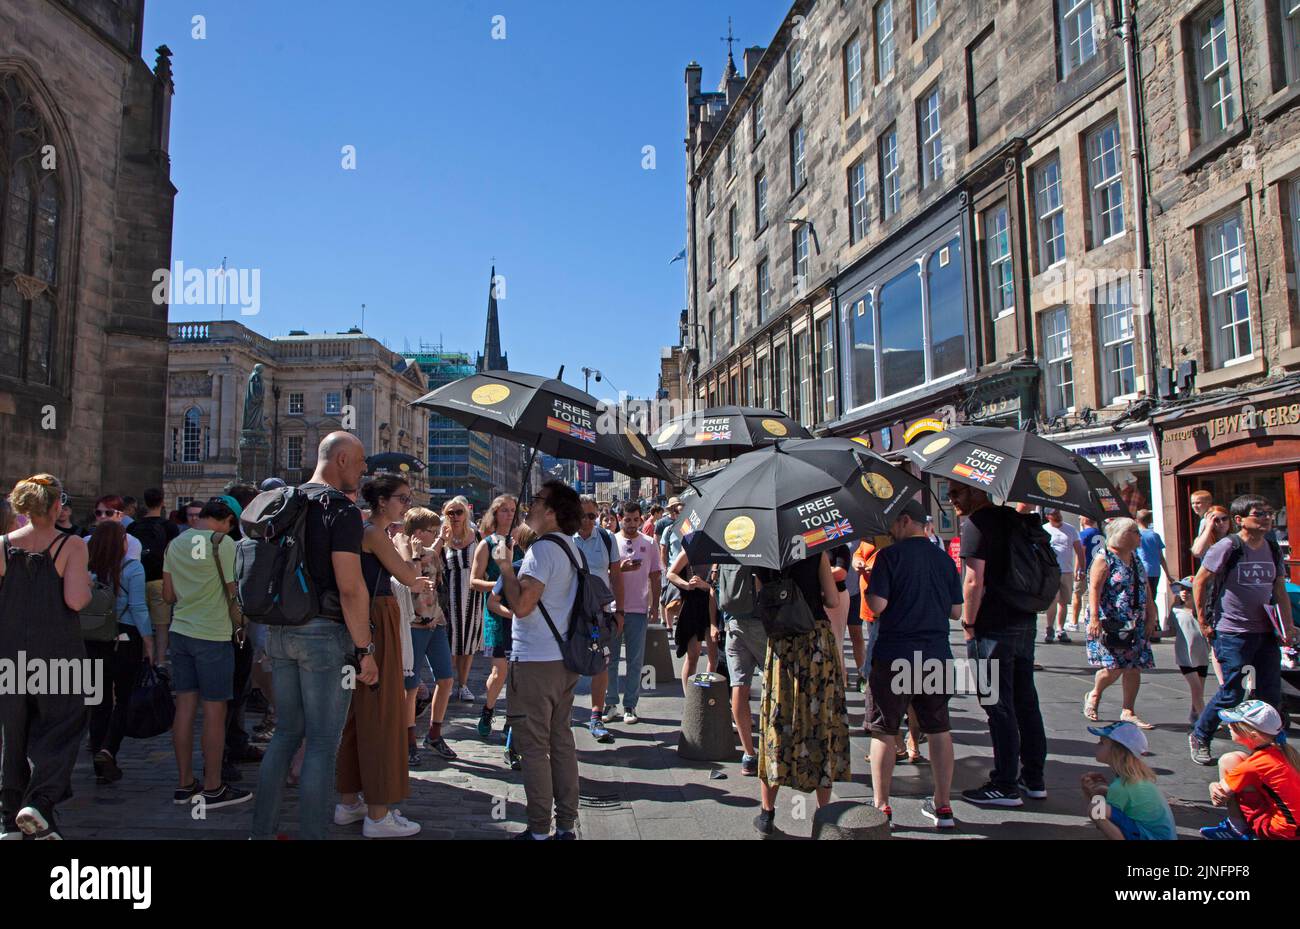 City Centre, Edinburgh, Scotland, UK. 11th August 2022. EdFringe 6th Day on the Royal Mile keeping busy with crowds of people looking for entertainment. Weather 27 degrees centigrade had people looking to top up water bottles and to find shade in the ciy's gardens. Pictured: Over 60 people clogging up the pavemnets and road queuing for free walking tour of the city.  Credit: Arch White/alamy live news. Stock Photo